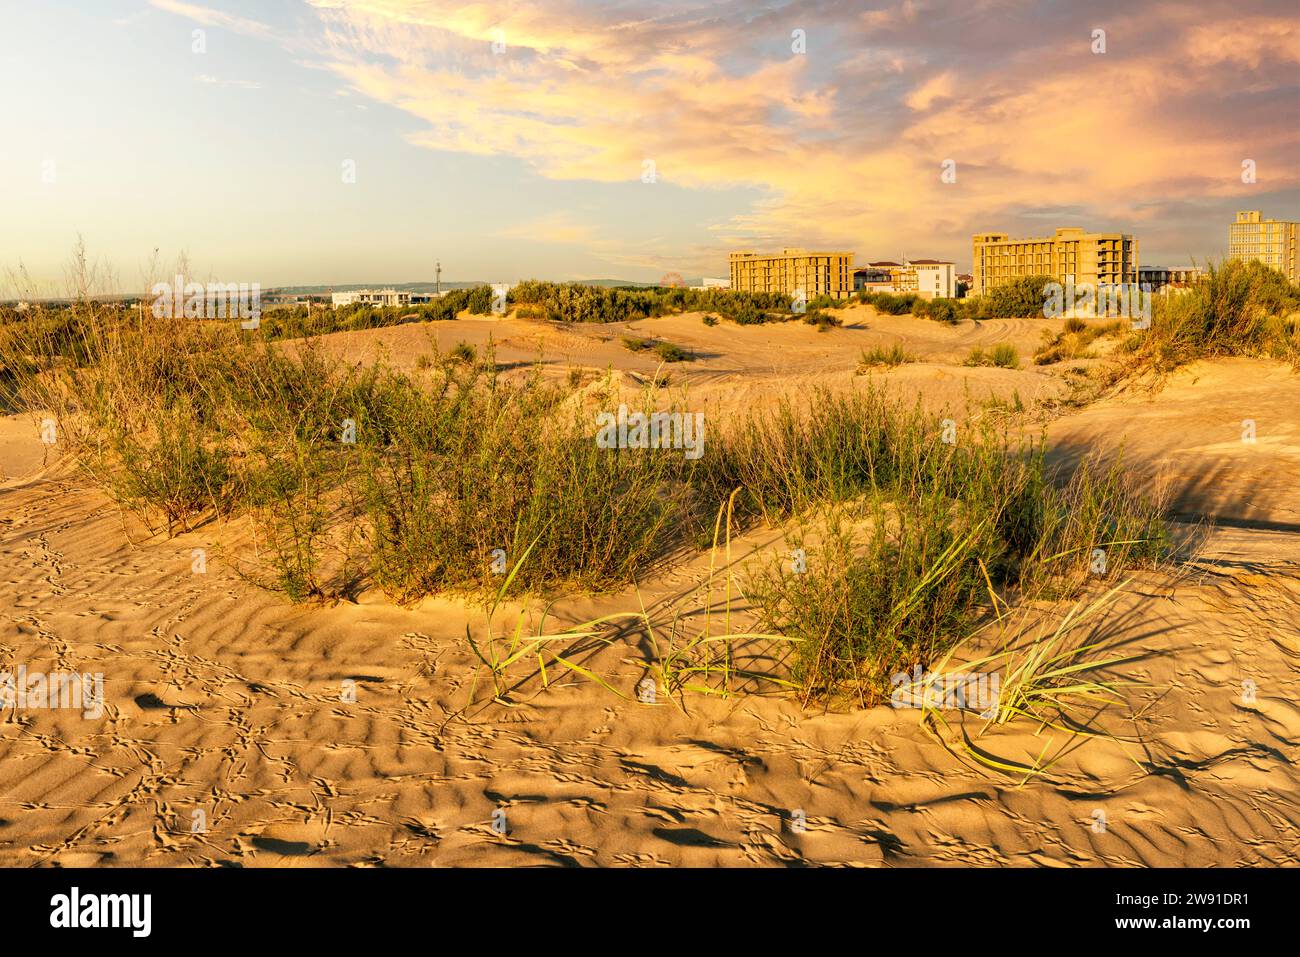 Sand dunes on the outskirts of the city Stock Photo